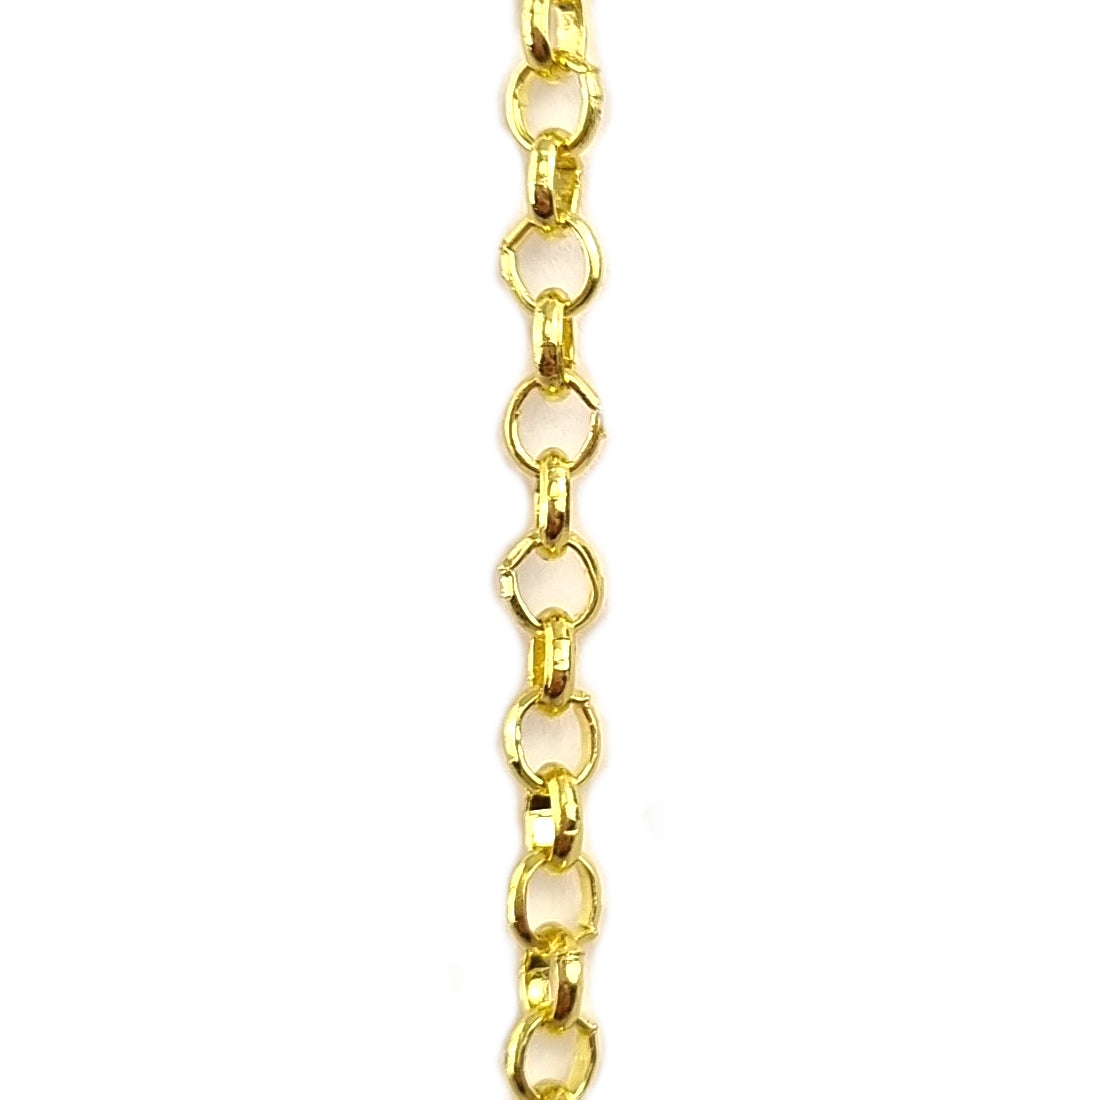 Box Jewellery Chain Gold Plated x 25m Reel. Various Sizes. Shop Jewellery Chain online. Australia wide shipping. Chain.com.au